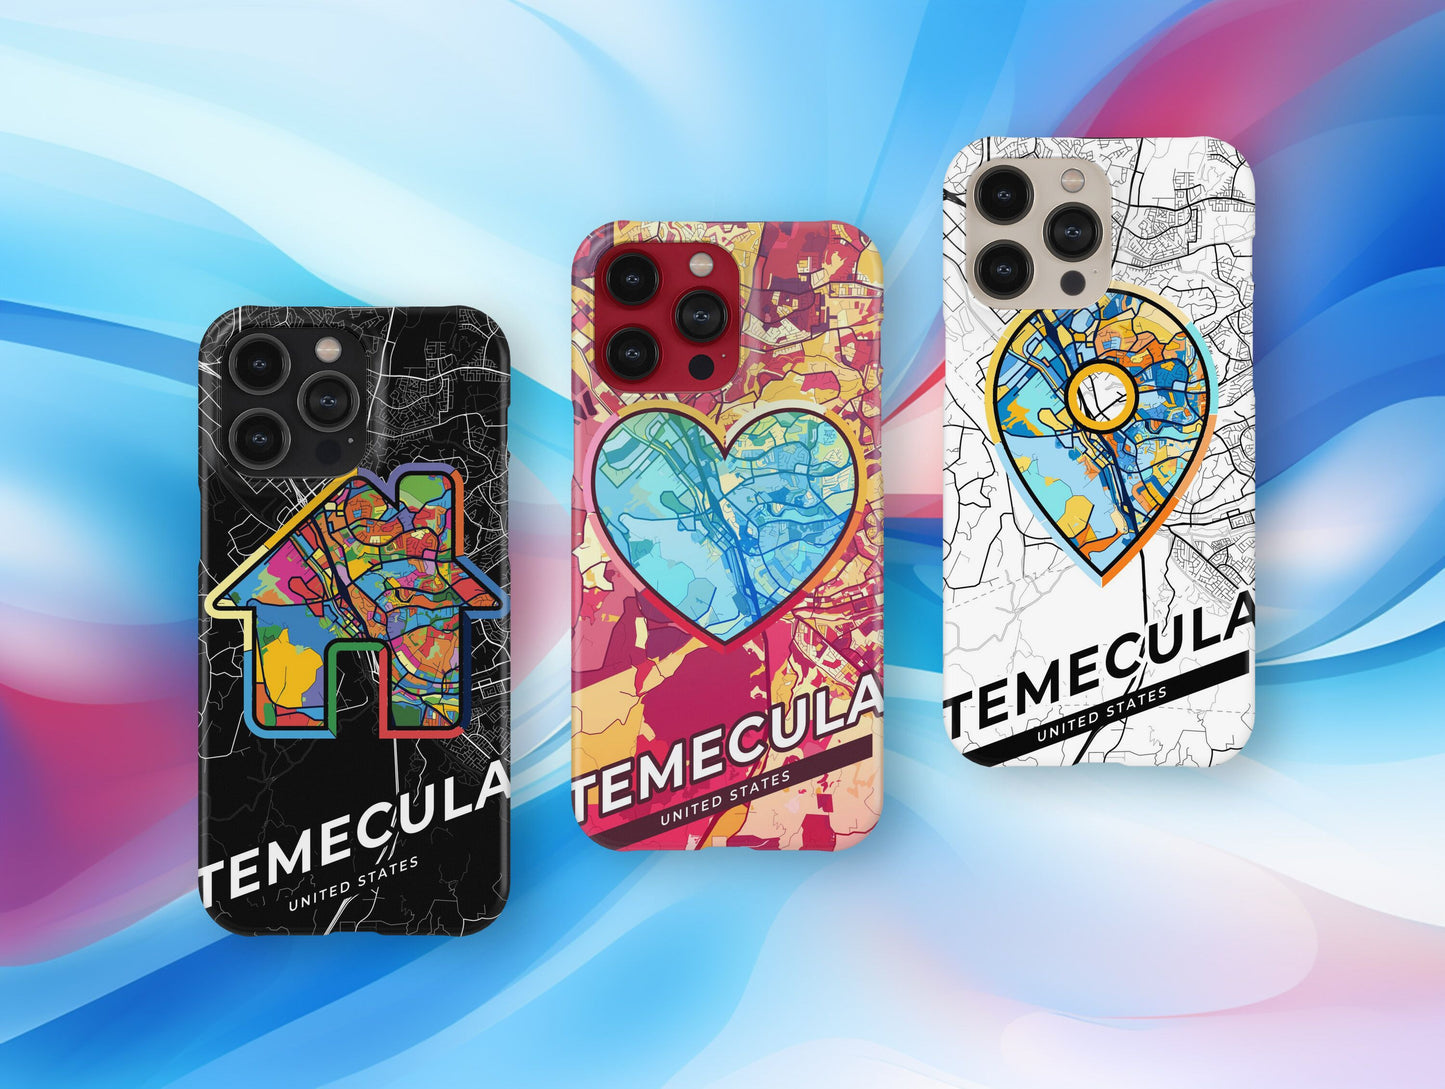 Temecula California slim phone case with colorful icon